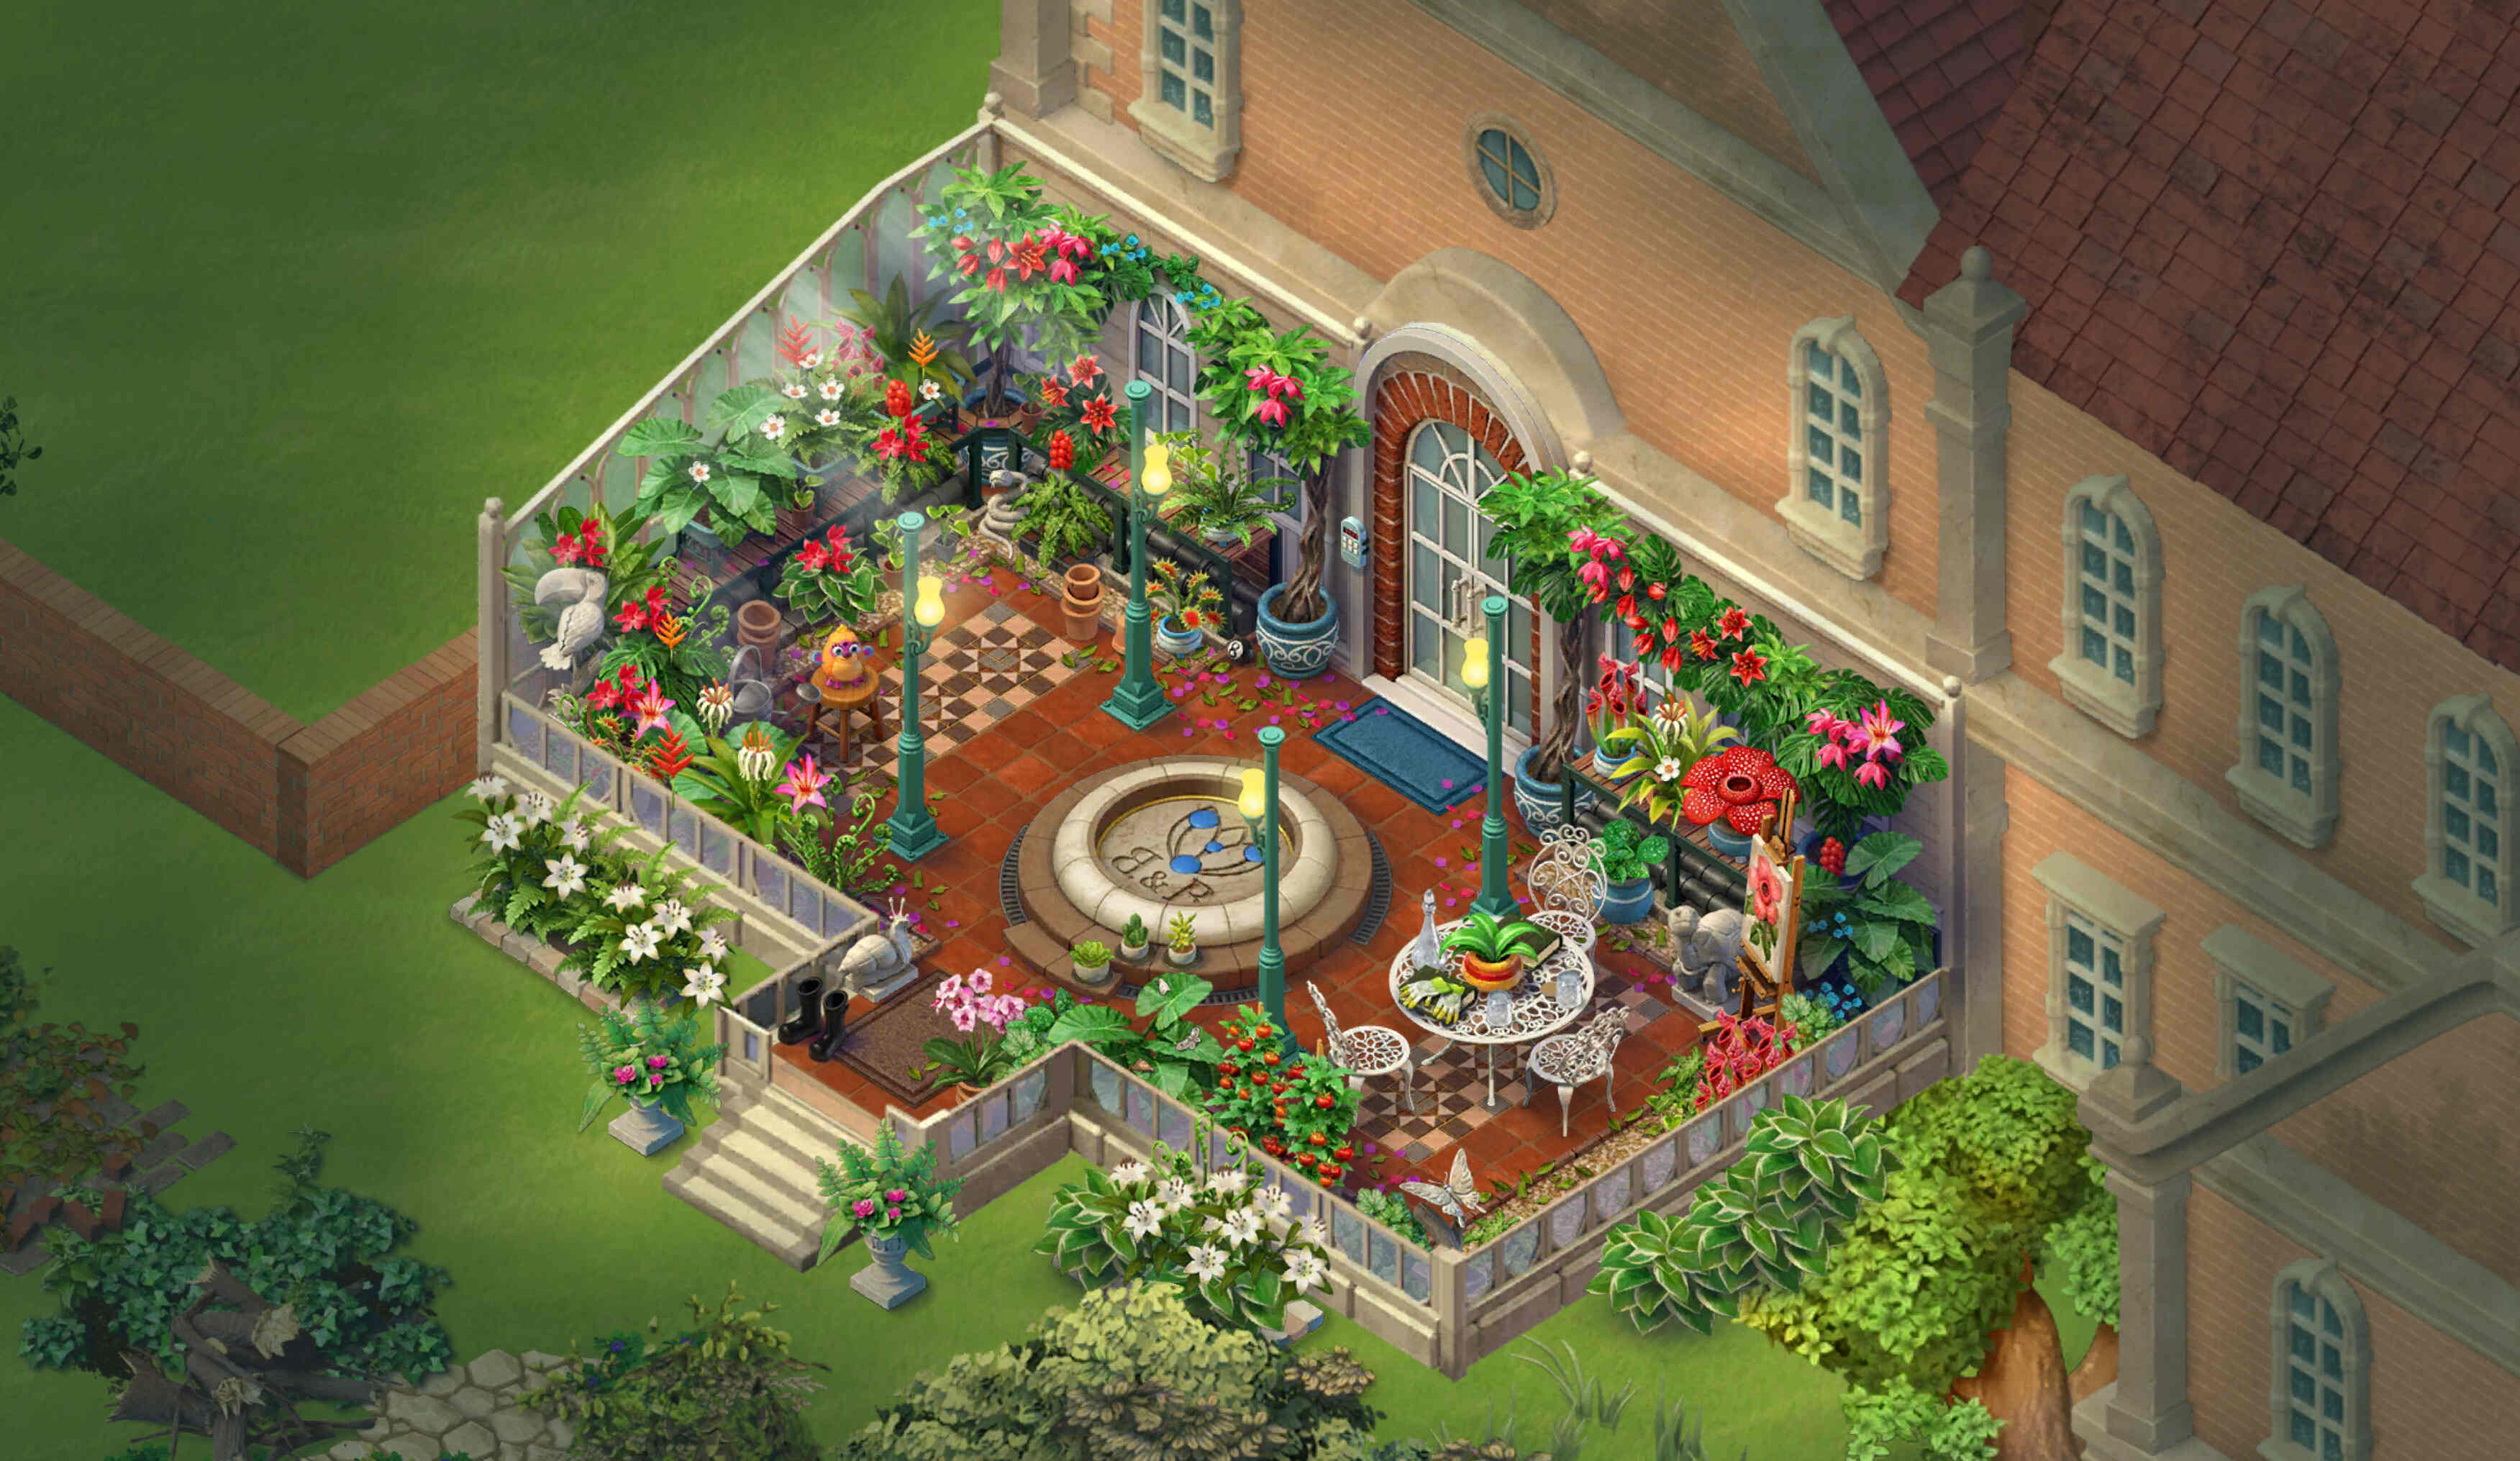 Merge Mansion conservatory after finishing the area